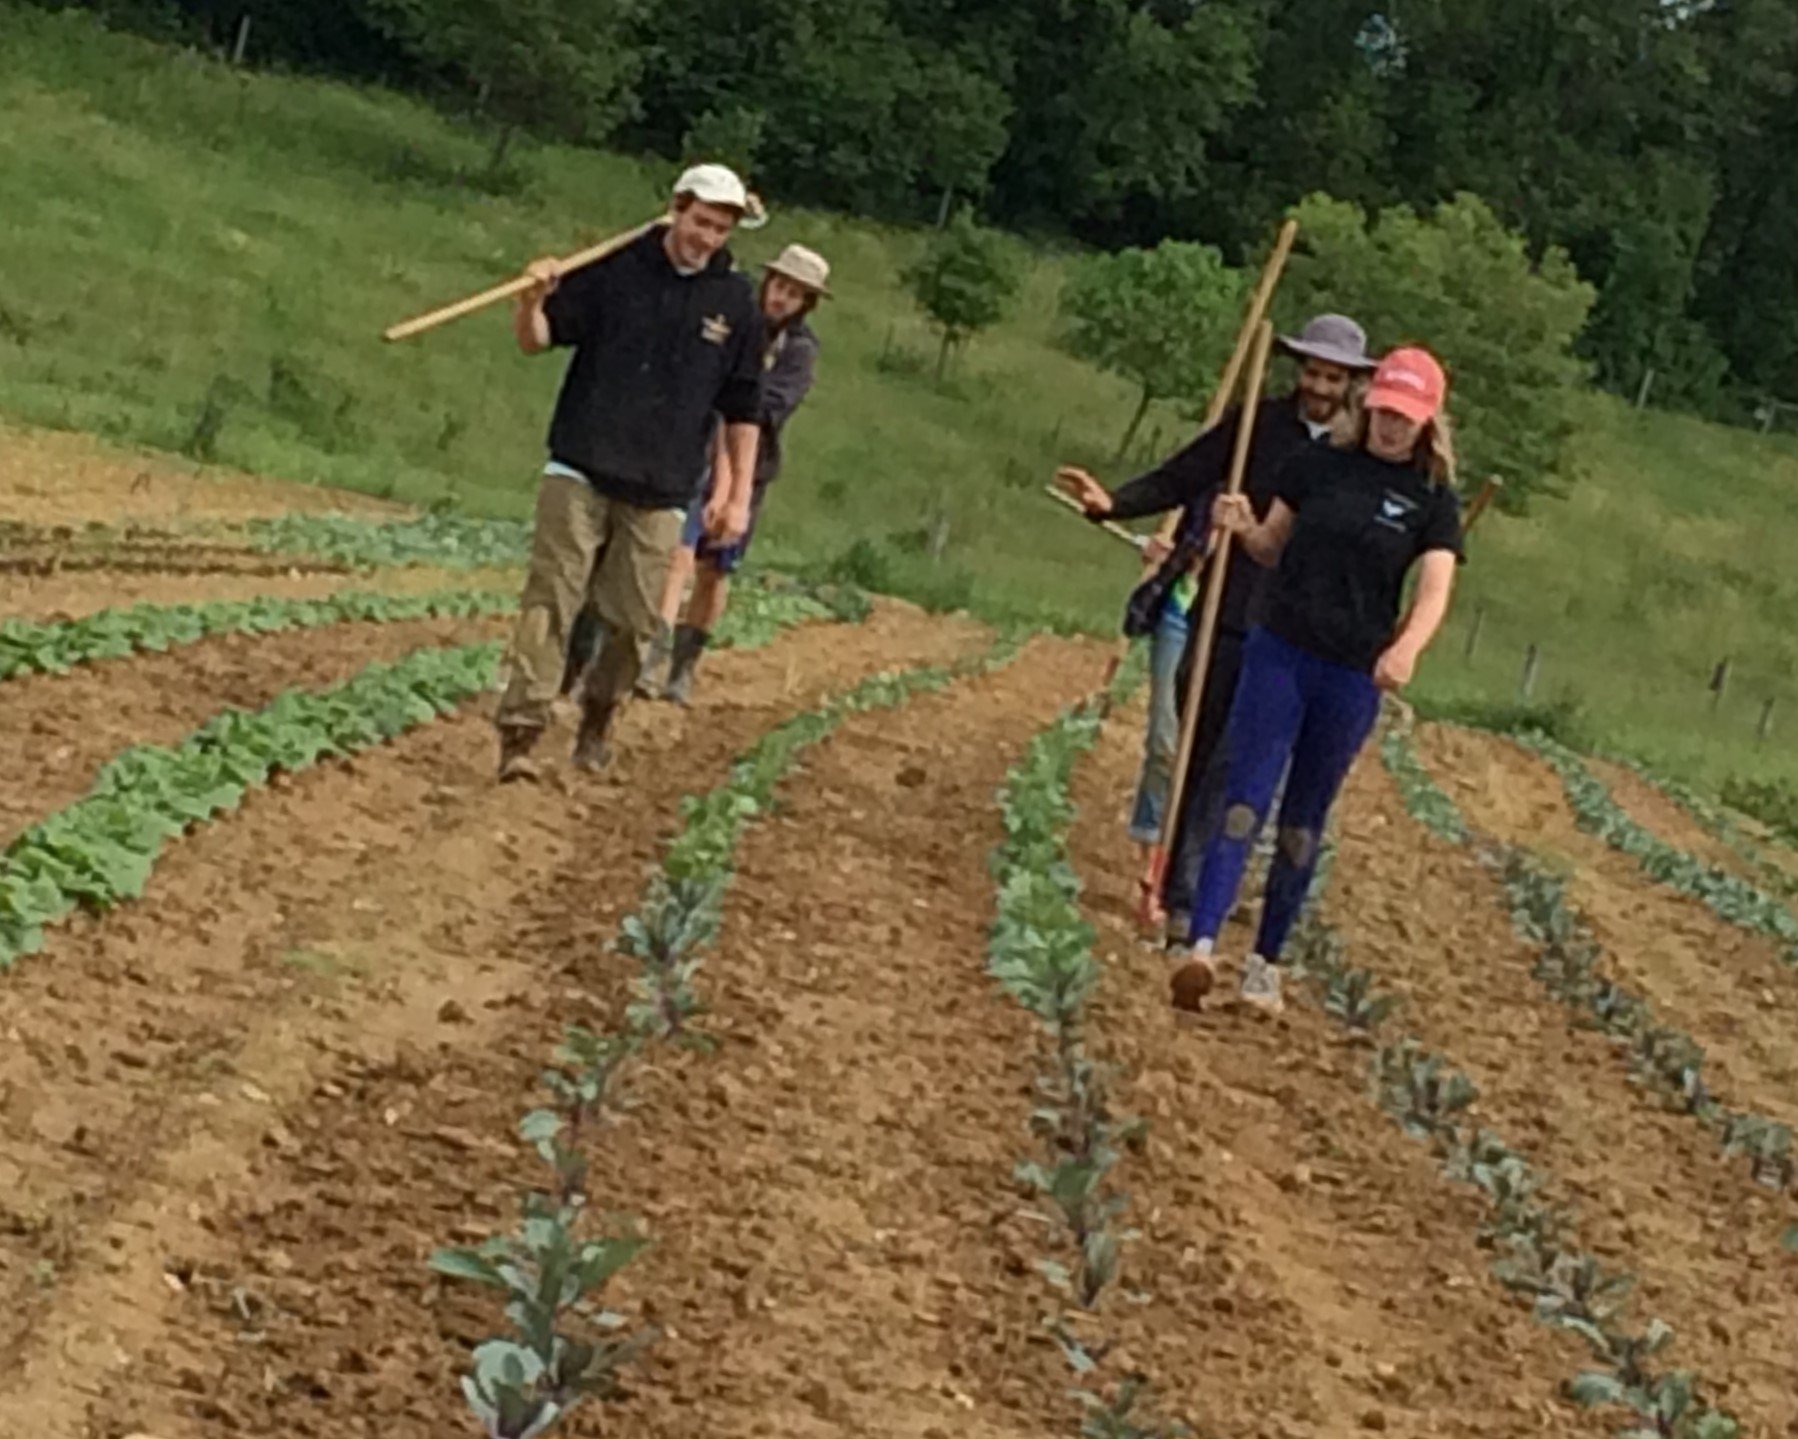 Previous Happening: Dickinson College Farm Field Notes for Week of May 27th